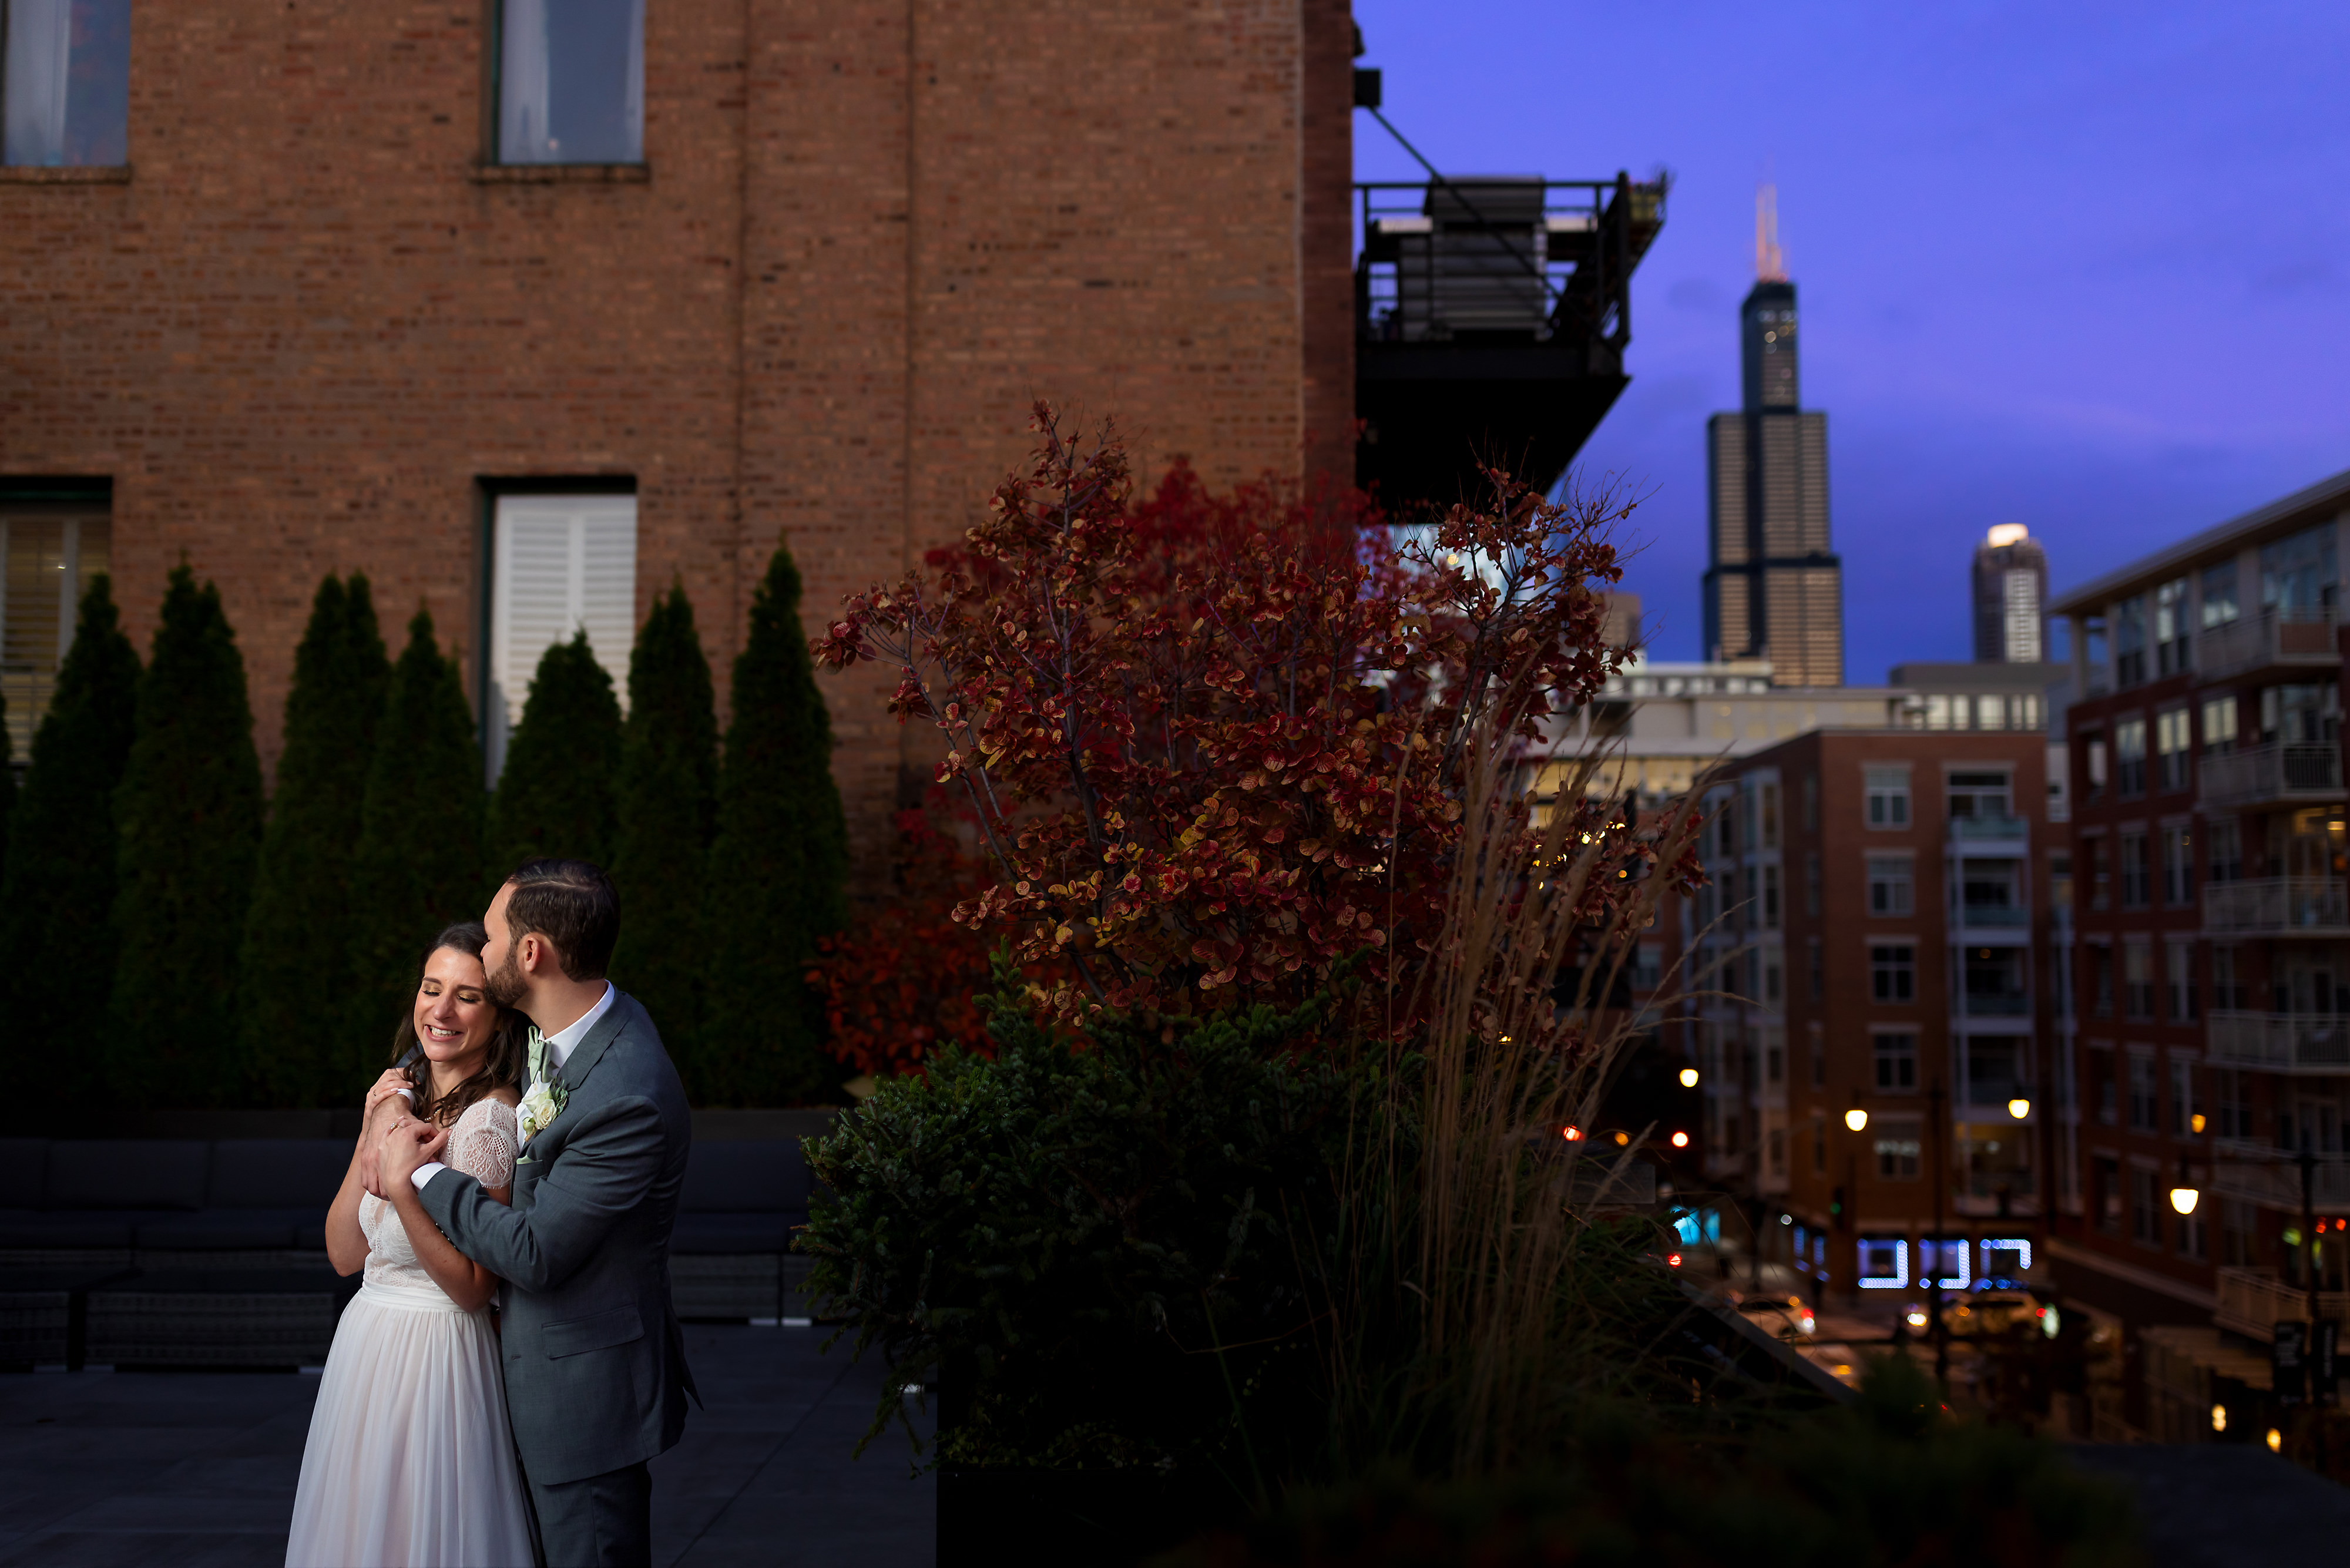 Bride and groom pose for portrait on the rooftop during wedding at Loft Lucia in Chicago's West Loop neighborhood.